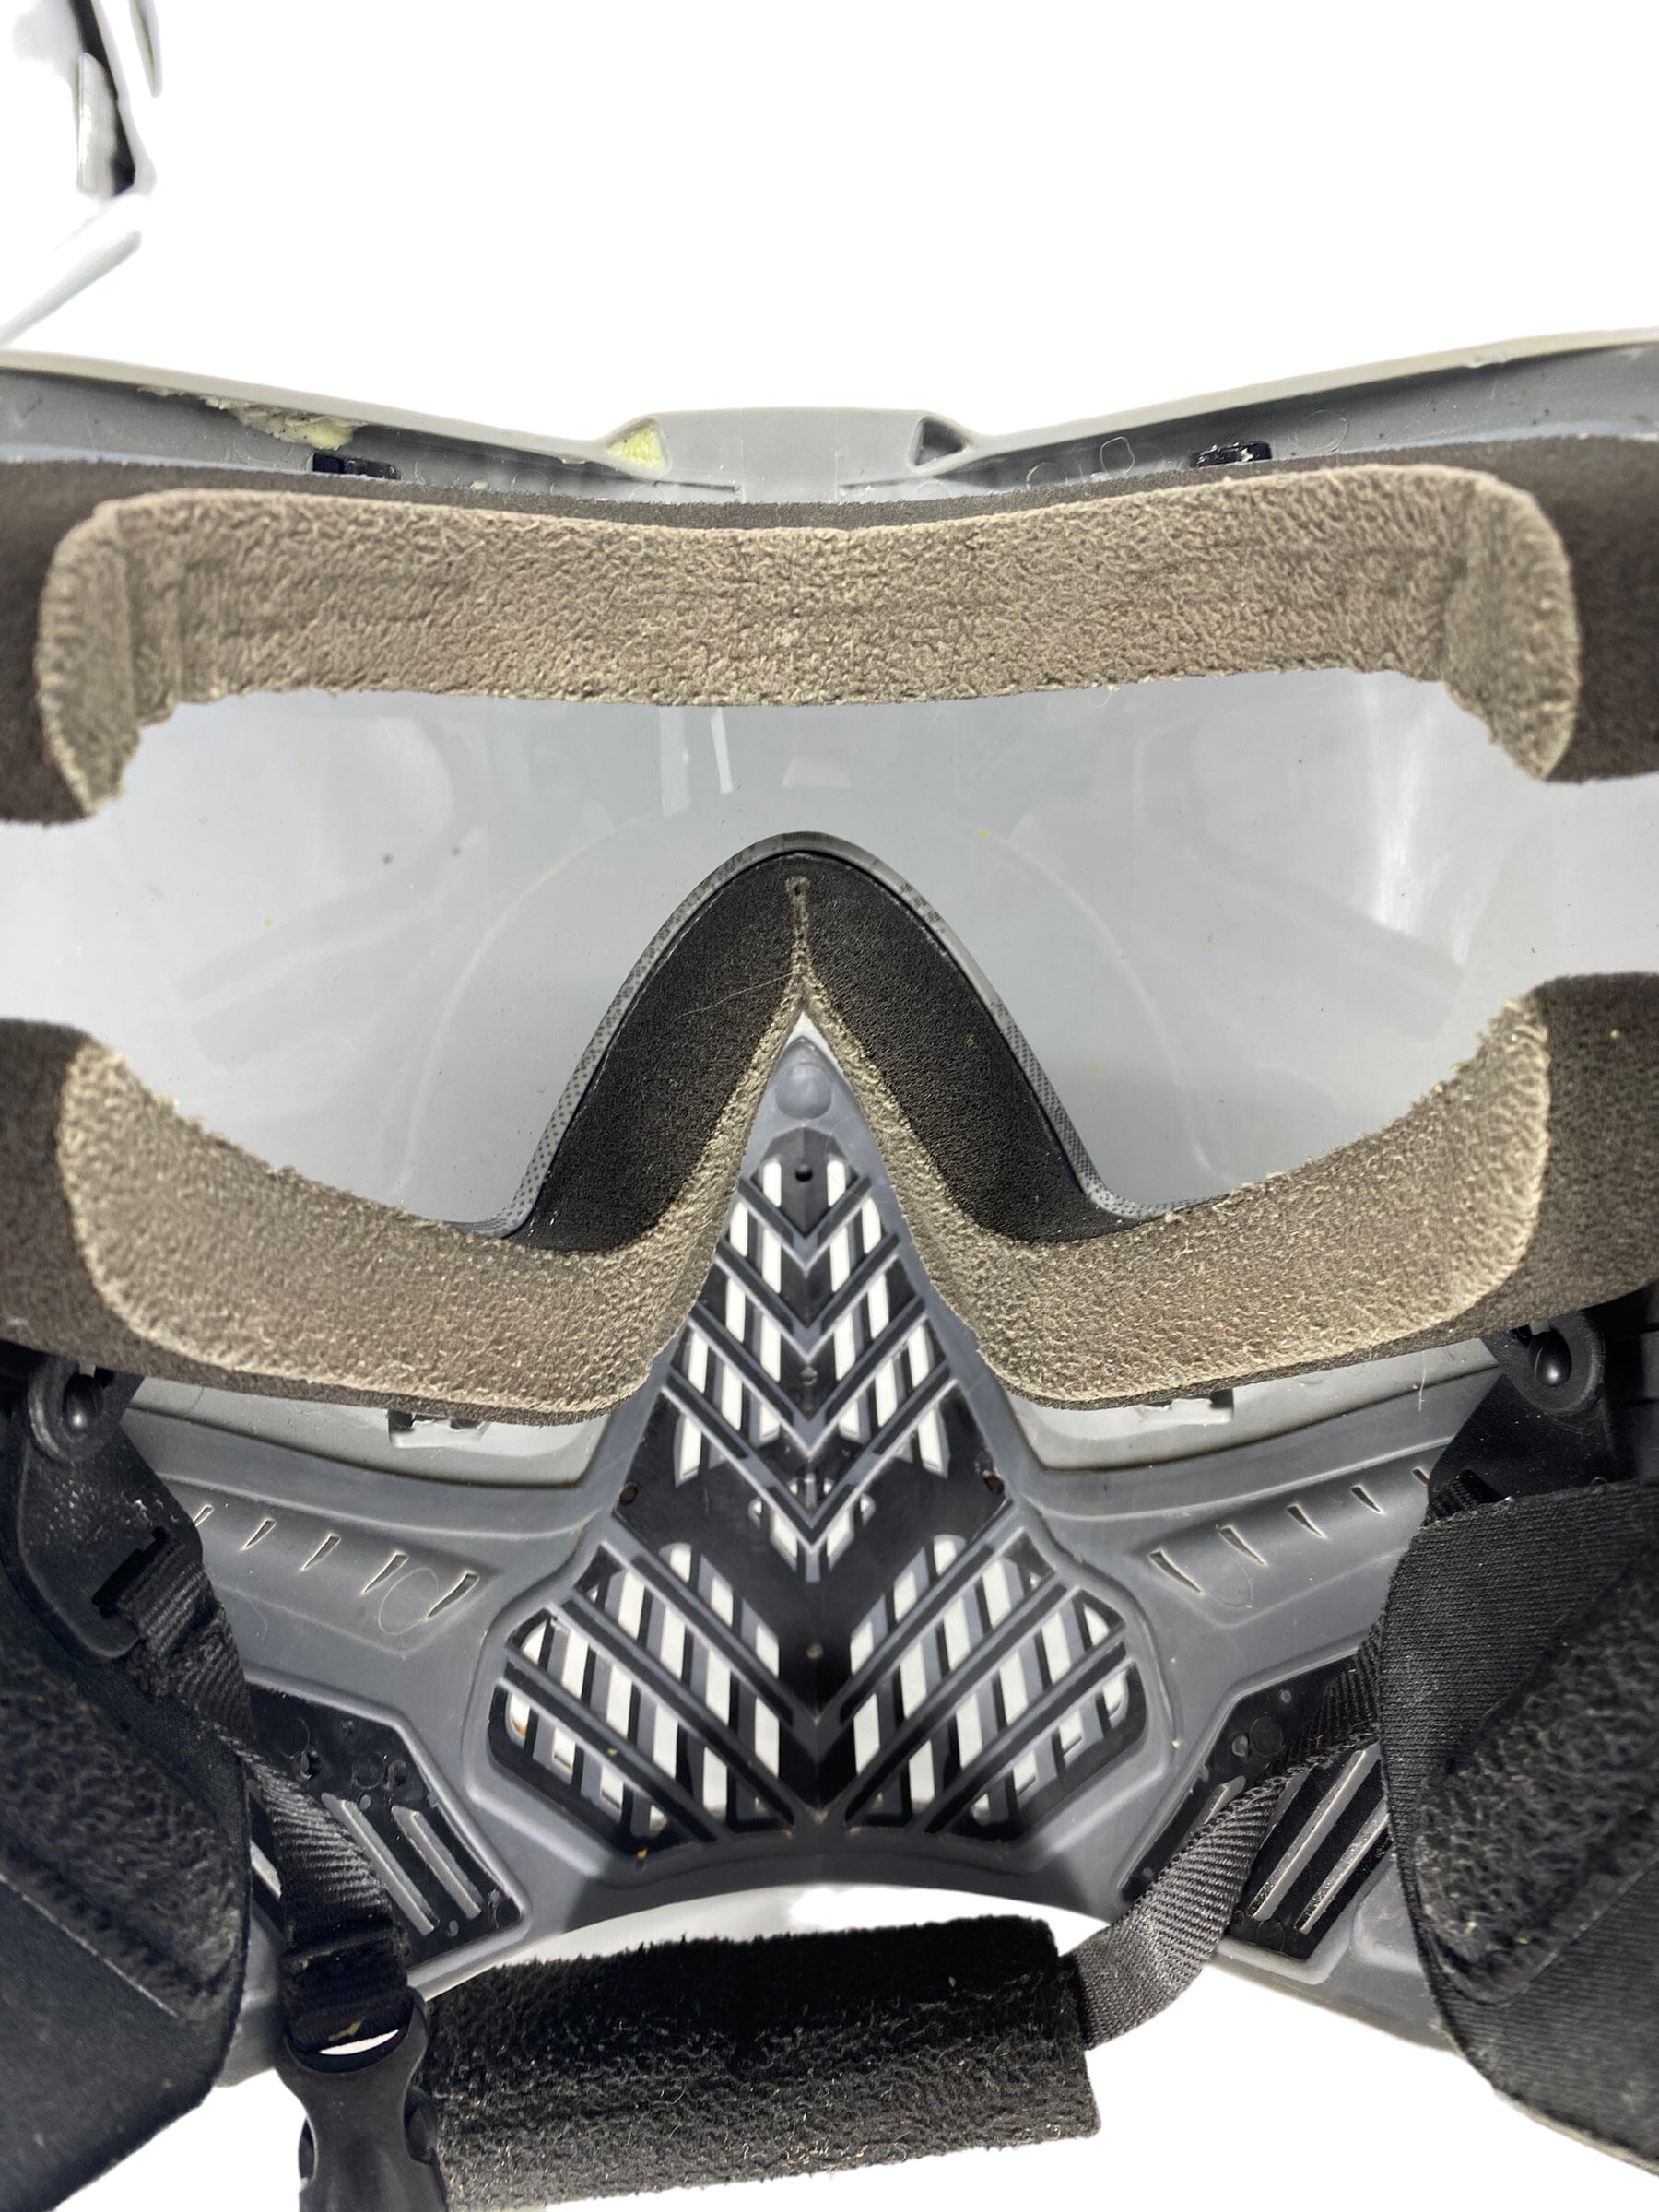 Used Dye i5 Invision Mask Goggle Paintball Gun from CPXBrosPaintball Buy/Sell/Trade Paintball Markers, Paintball Hoppers, Paintball Masks, and Hormesis Headbands